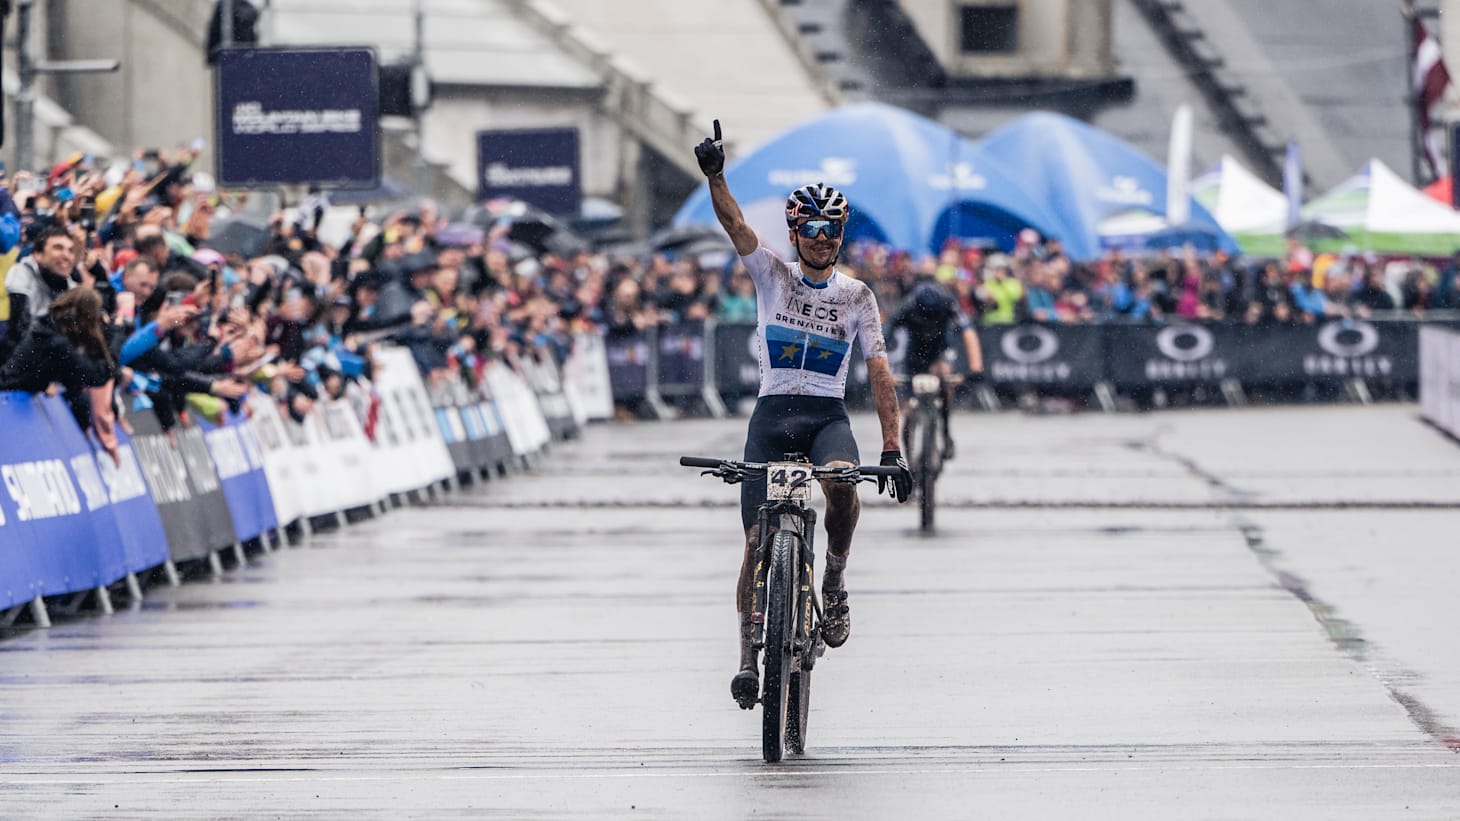 Tom Pidcock recovers from crash to win 2023 MTB World Cup opener in Nove Mesto